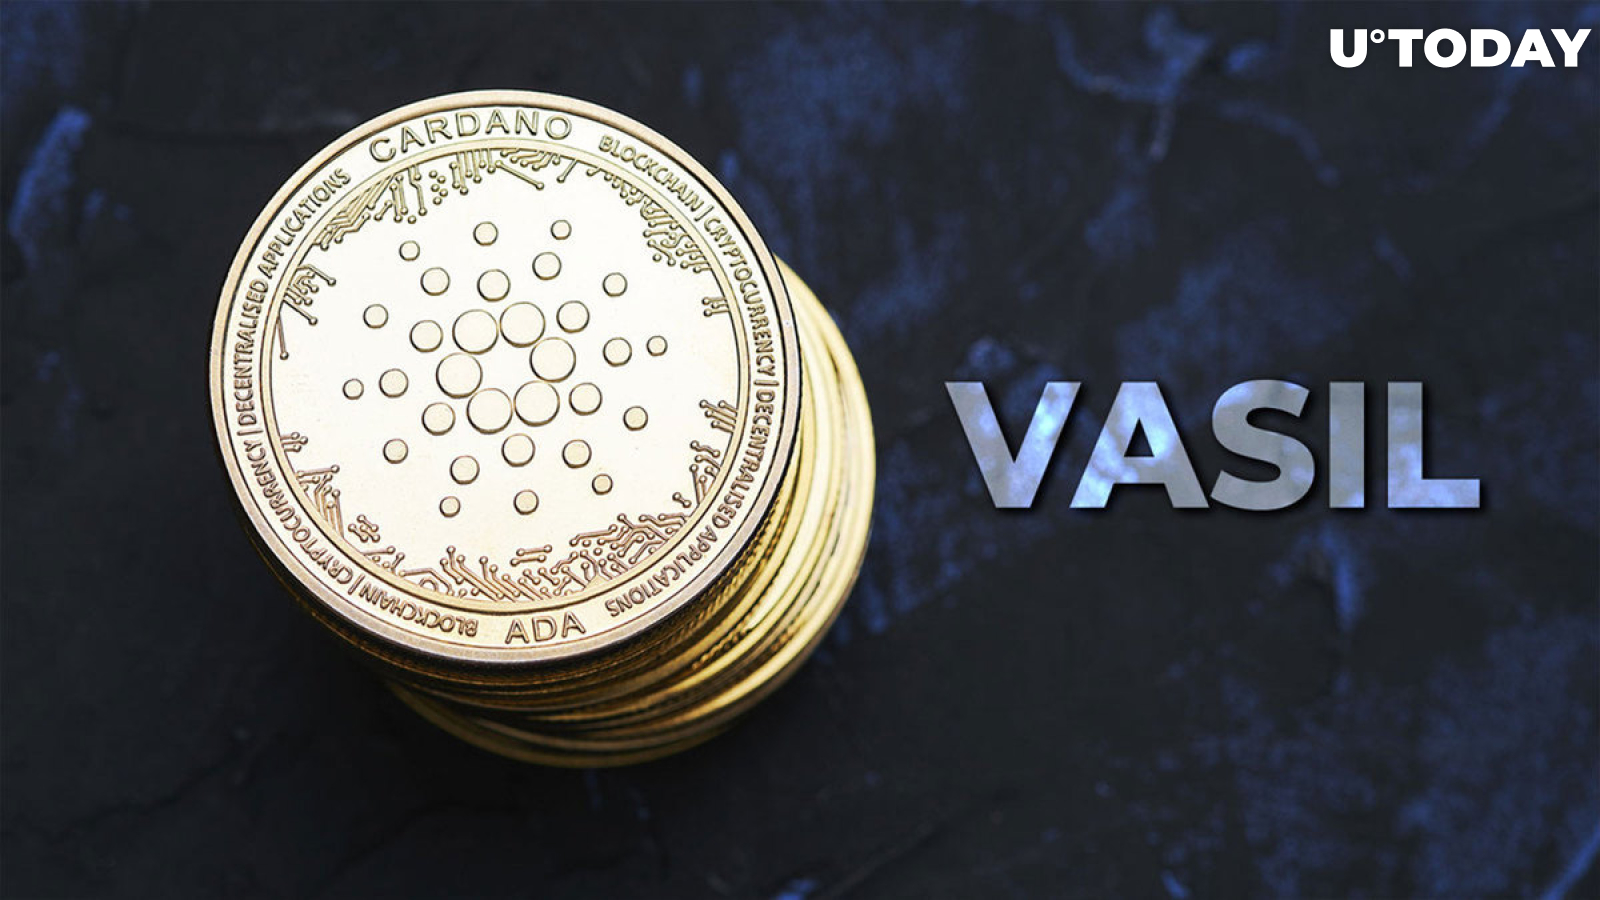 Cardano: Vasil Introduced Plutus V2 Scripts Gain Traction, Here's Number